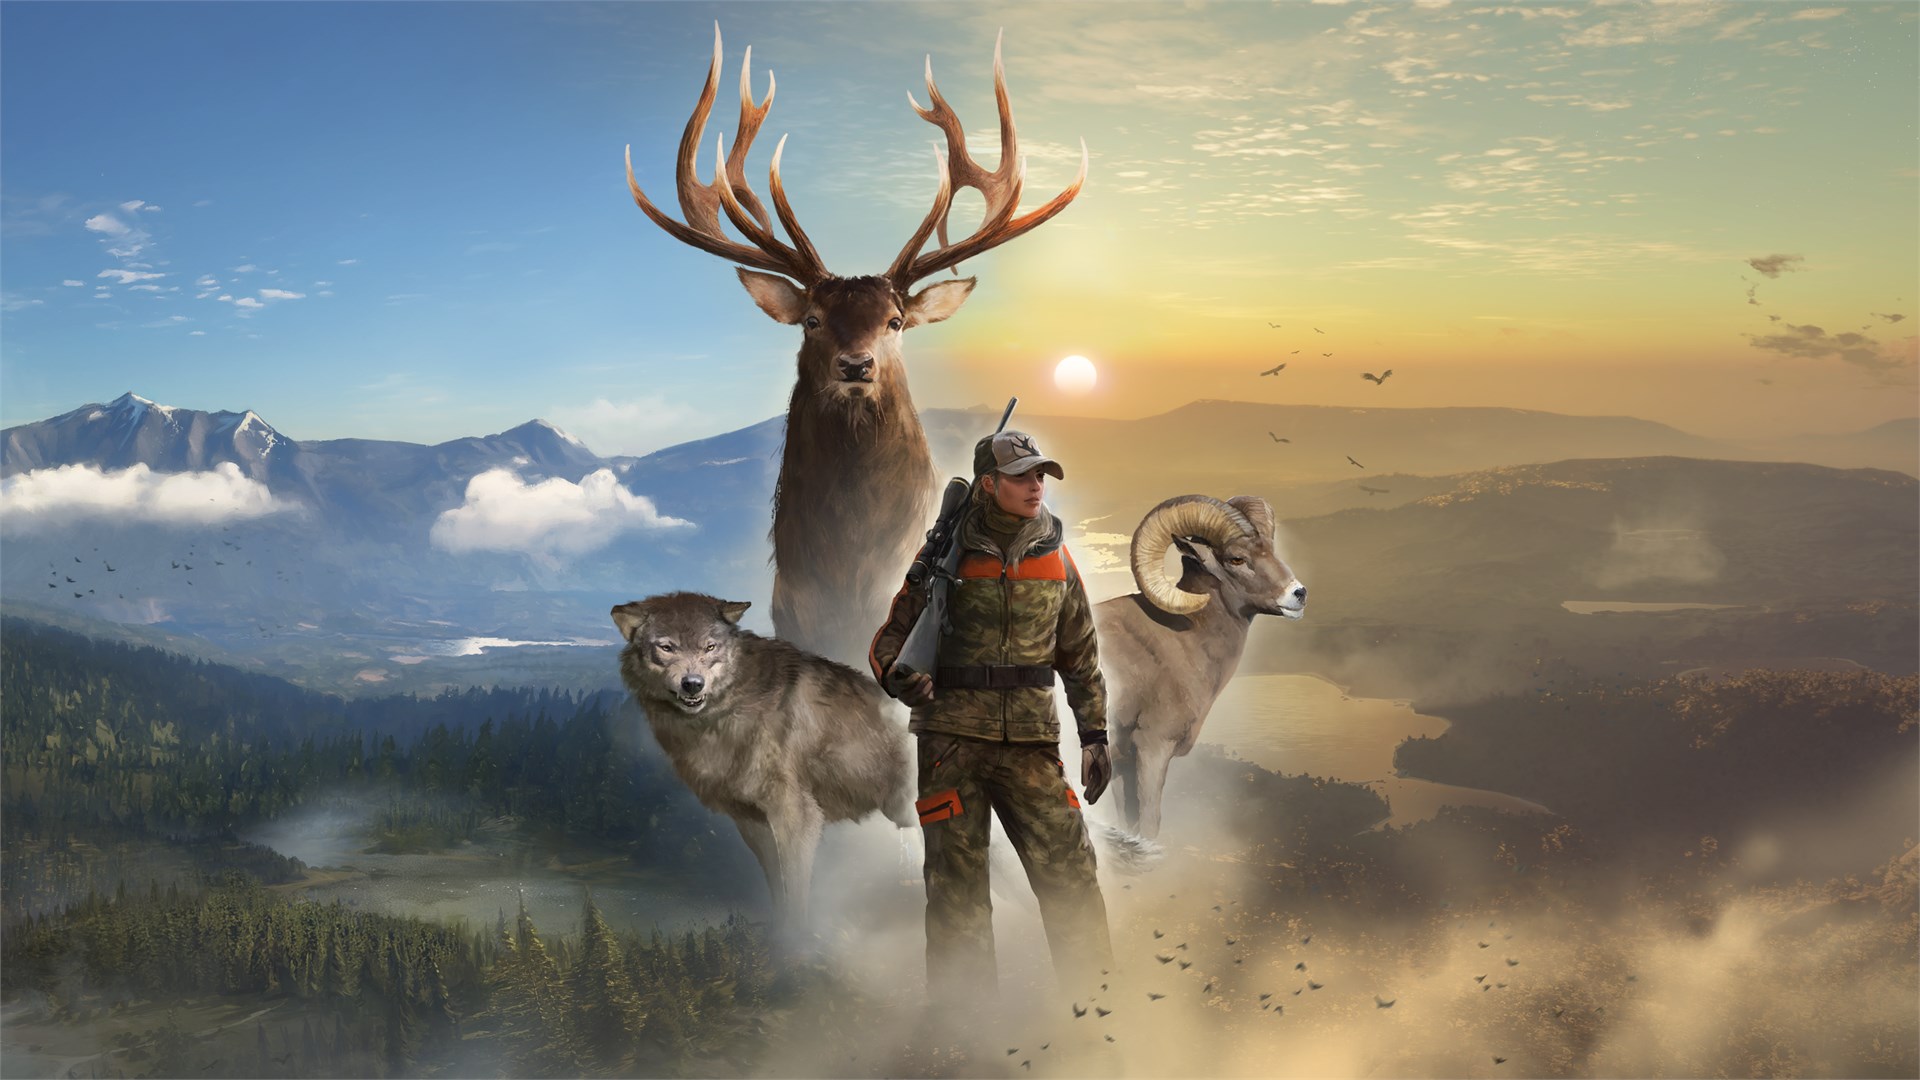 theHunter: Call of The Wild Wallpapers